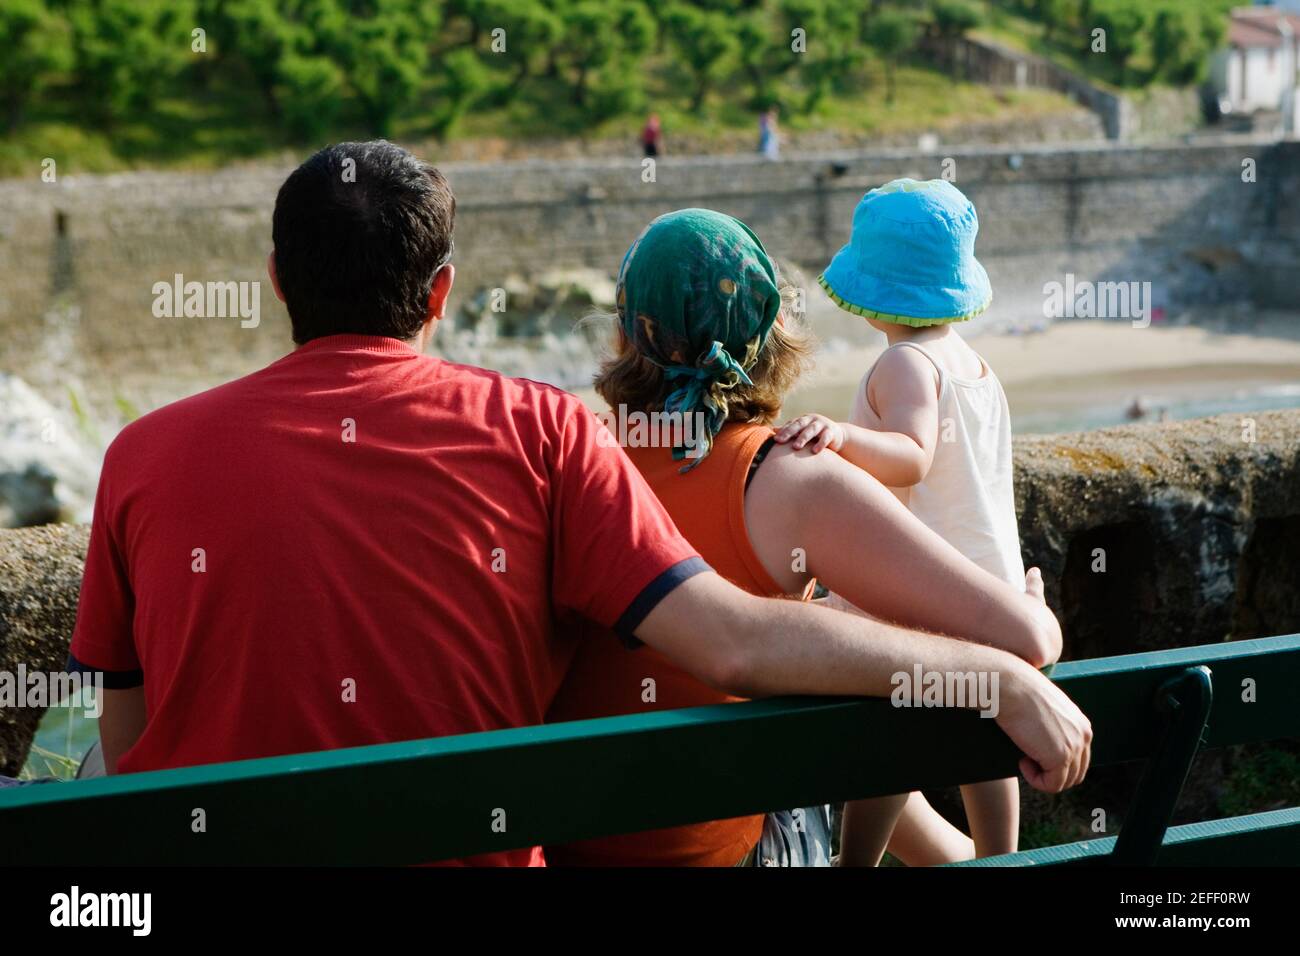 Rear view of a family on a bench, Biarritz, Basque Country, Pyrenees Atlantiques, Aquitaine, France Stock Photo